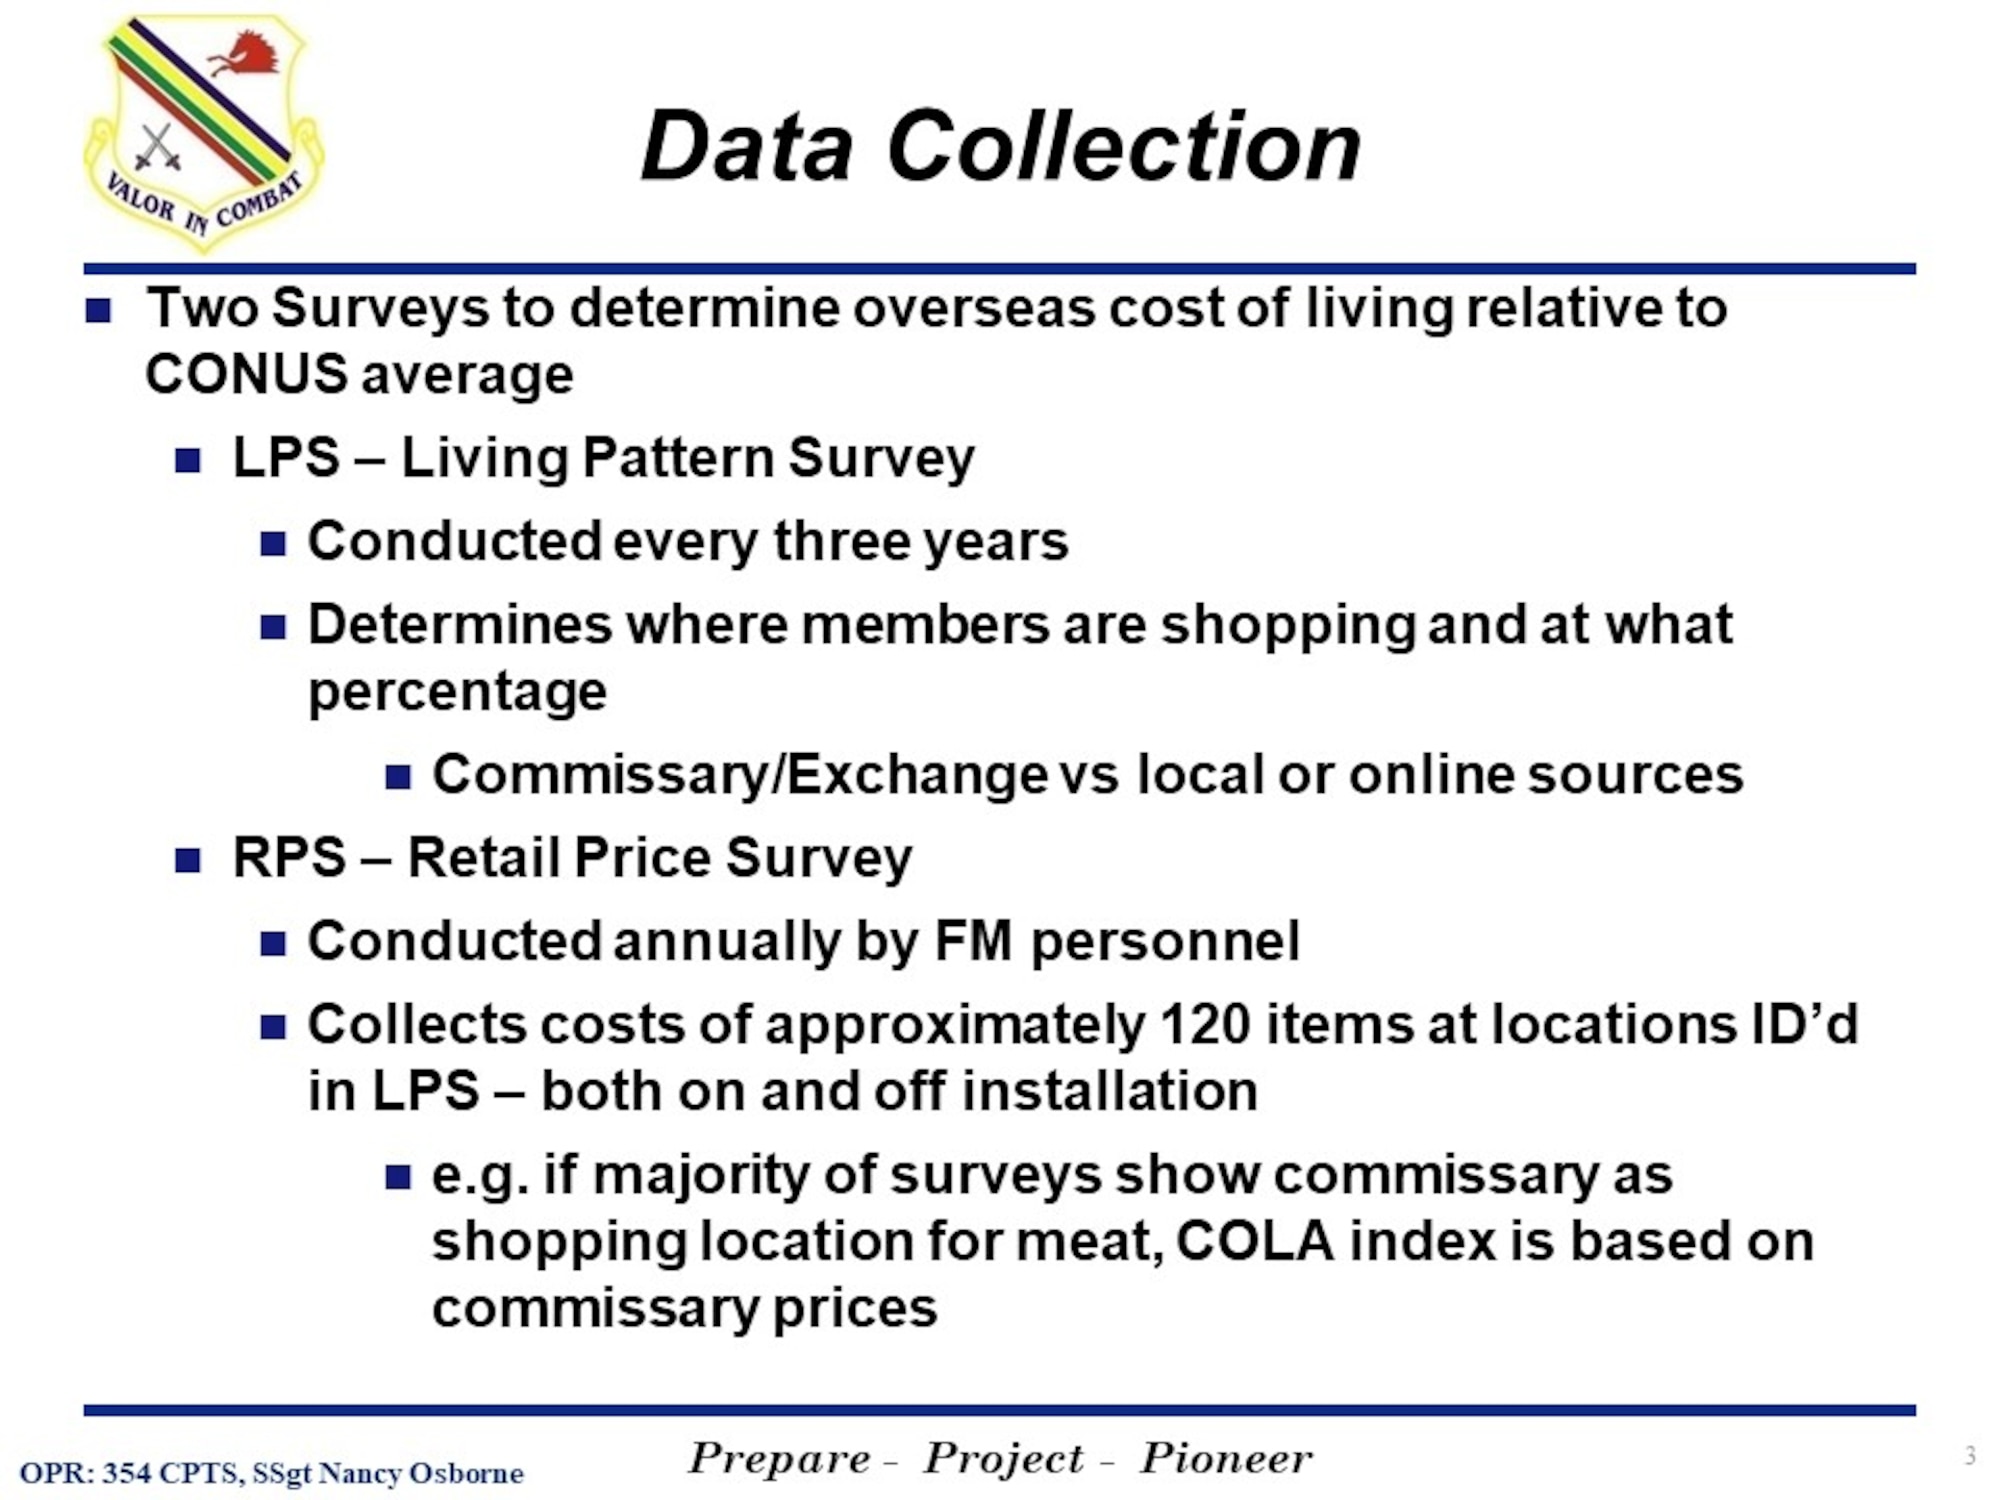 The 354th Comptroller Squadron of Eielson Air Force Base created Cost of Living Allowance (COLA) Survey slides to inform active duty members and families on the importance of participation in the COLA Survey for Alaska. (Graphic slide created by 354th Comptroller Squadron)